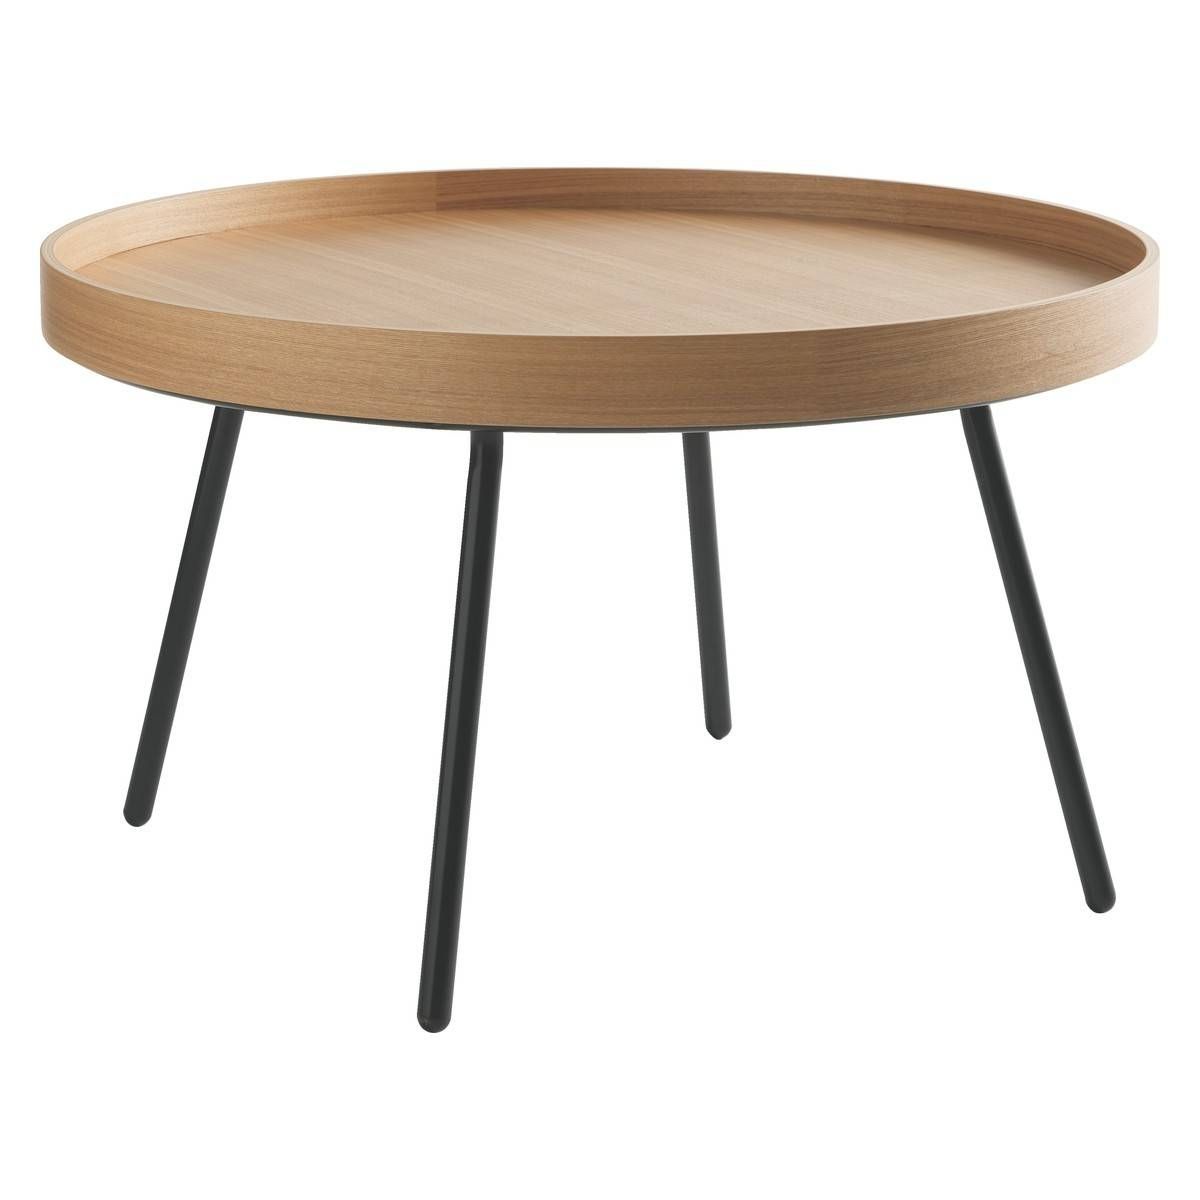 Coffee Tables; Modern Glass & Oak With Storage – Habitat Intended For Coffee Tables With Rounded Corners (View 7 of 30)